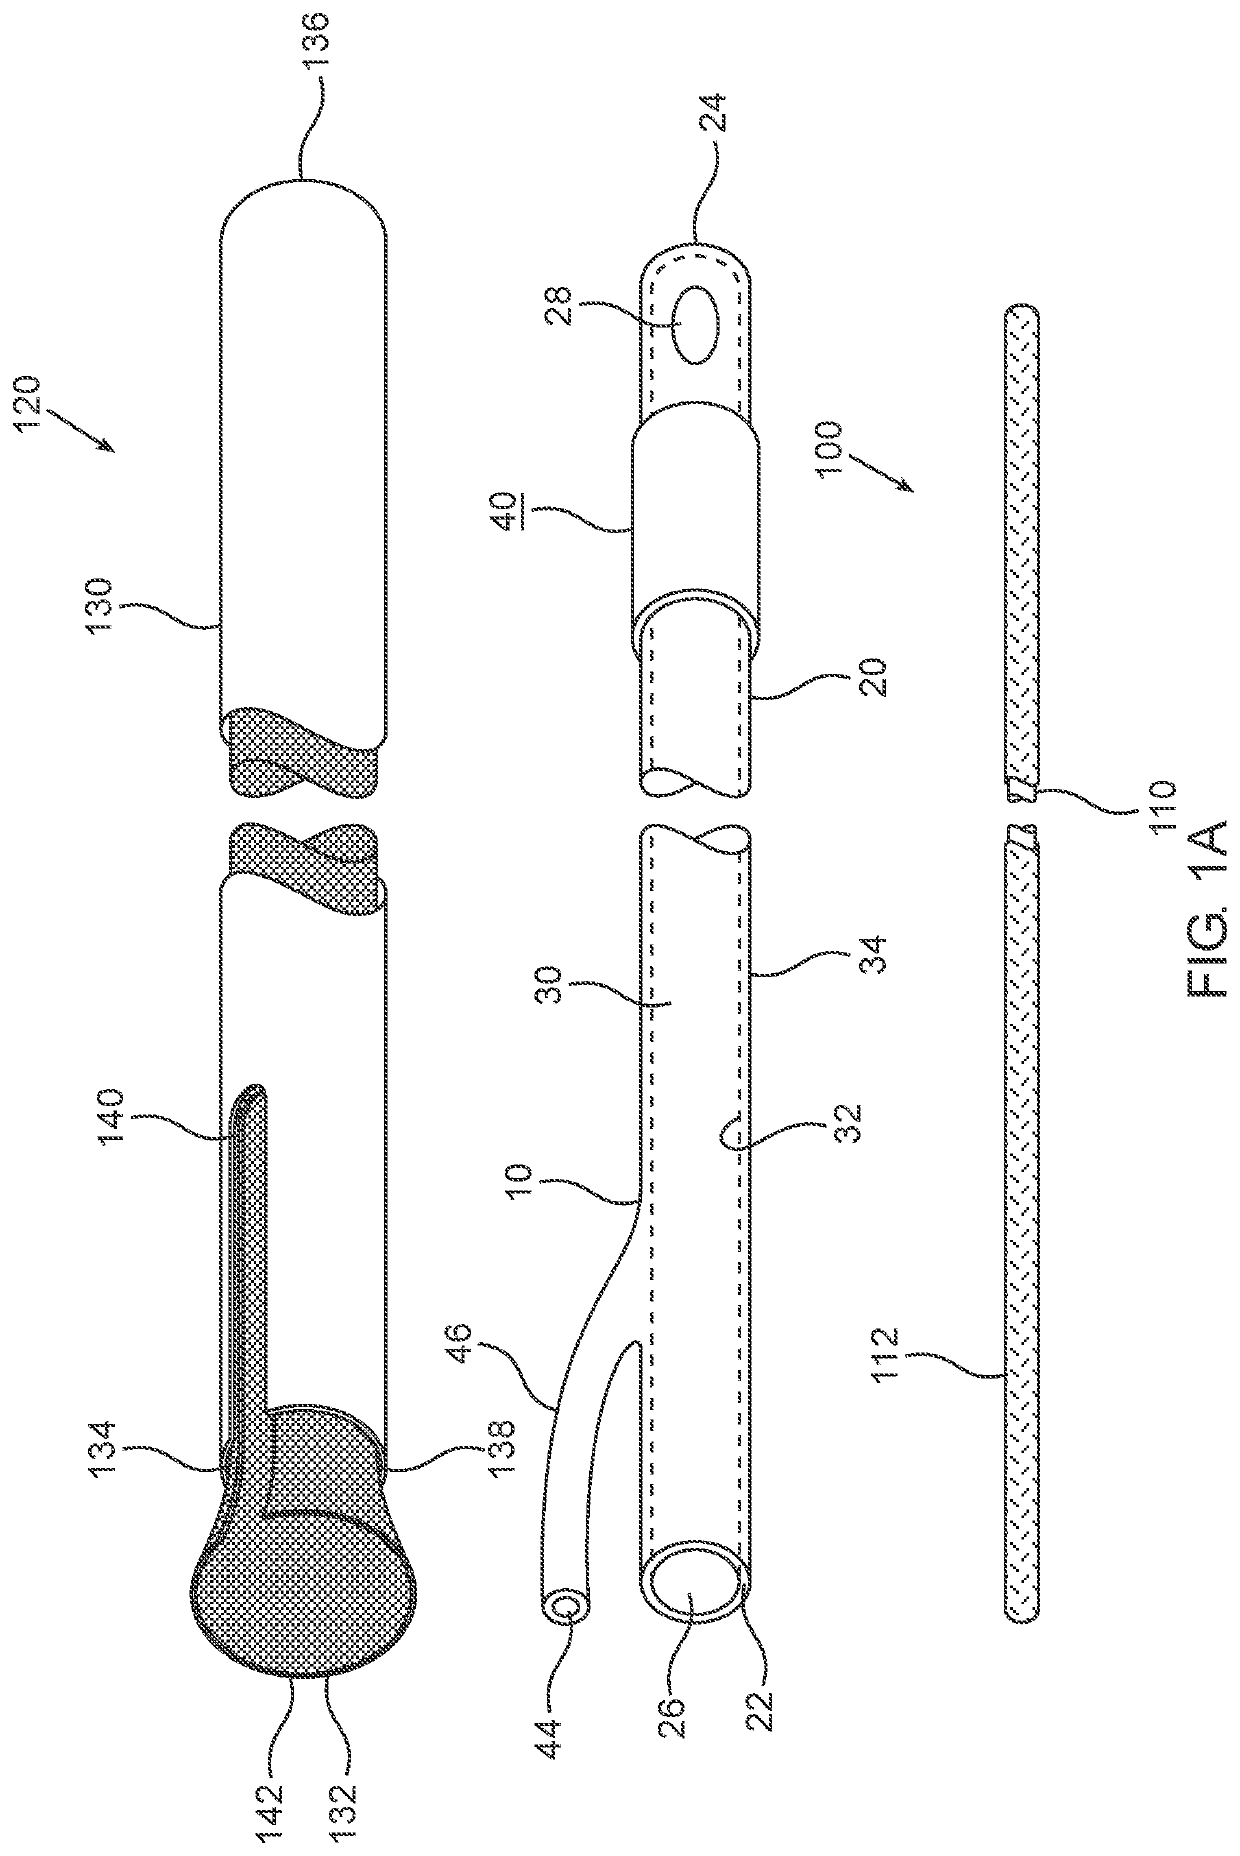 Method and apparatus for pre-treating a catheter